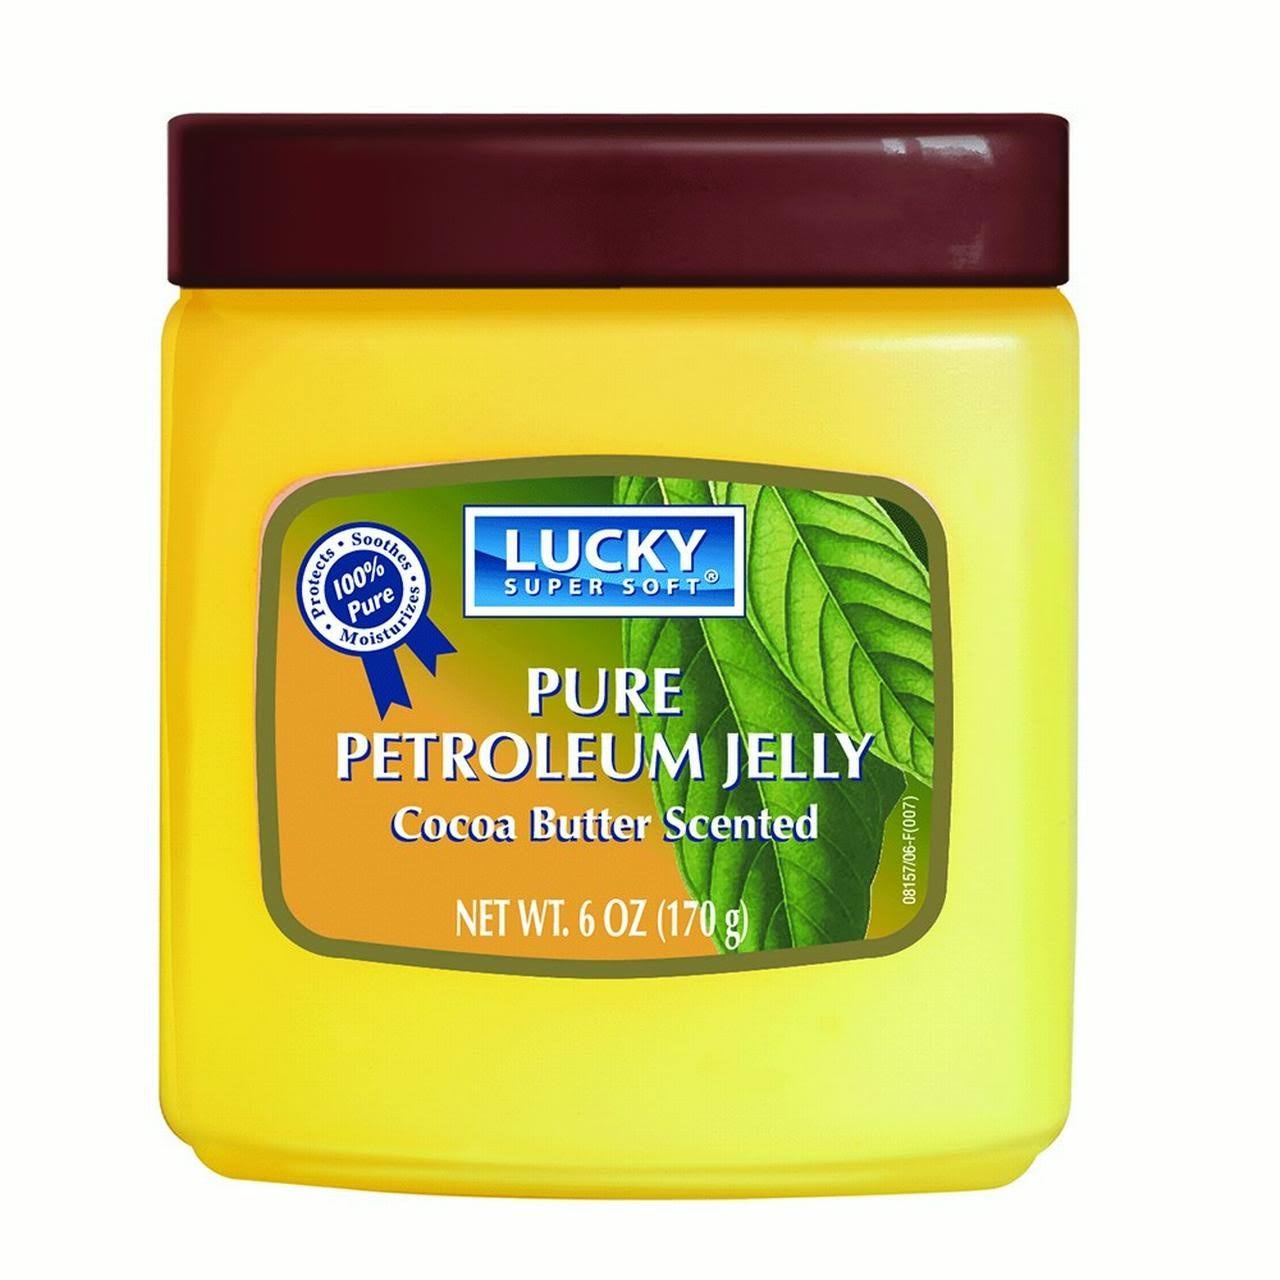 Lucky Super Soft Pure Petroleum Jelly - Cocoa Butter, 170g